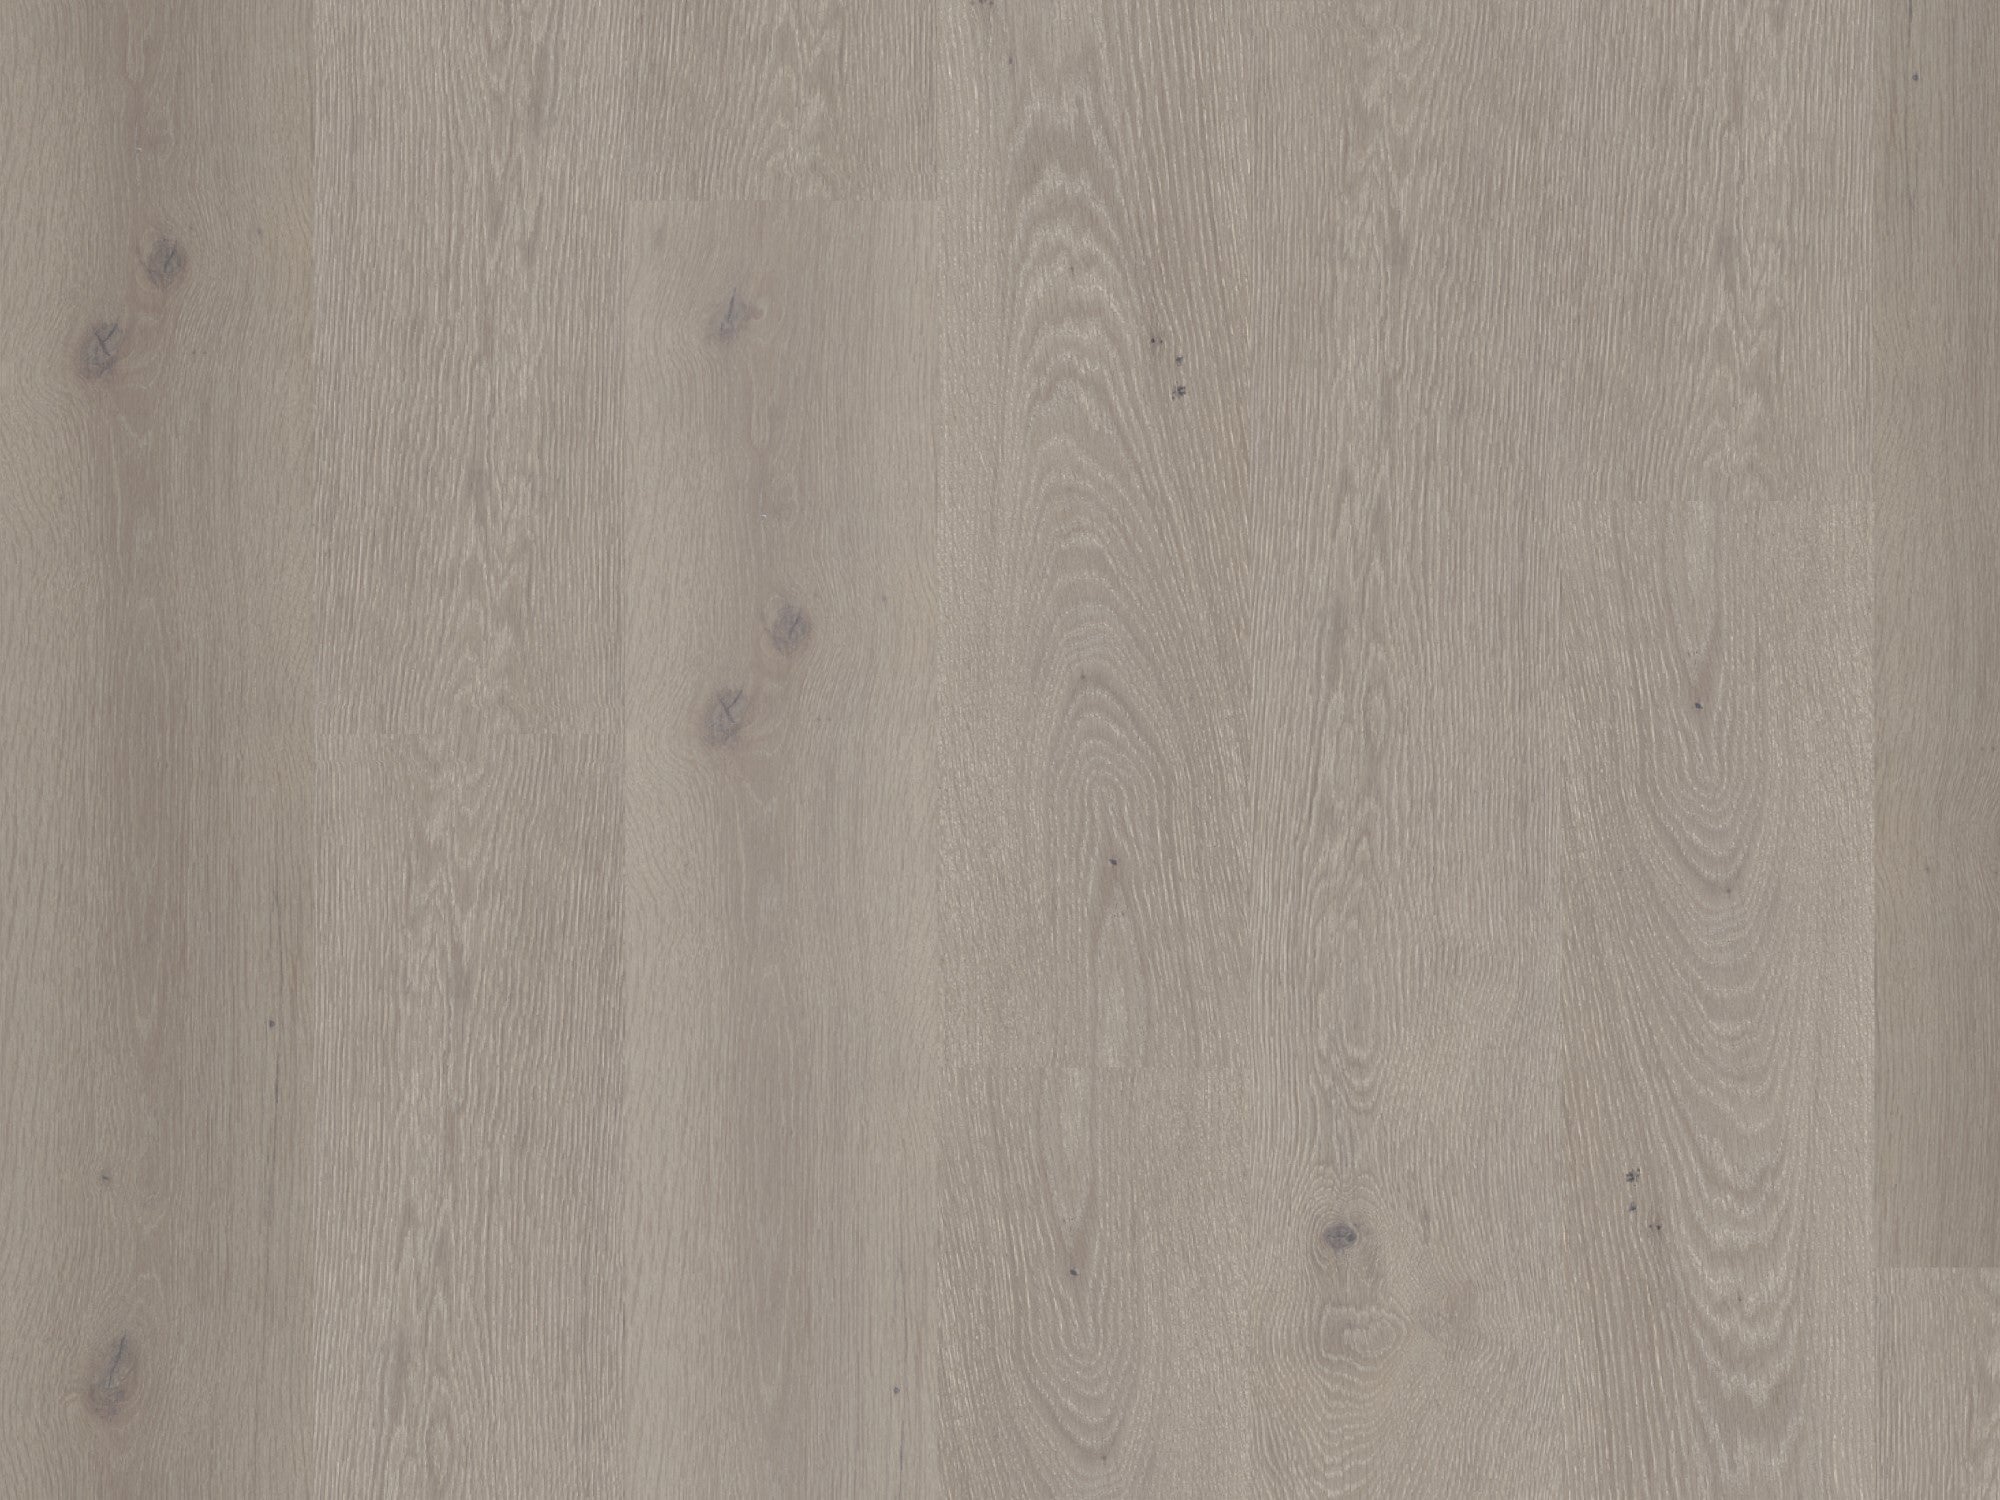 duchateau signature global winds levante european oak engineered hardnatural wood floor uv lacquer finish for interior use distributed by surface group international